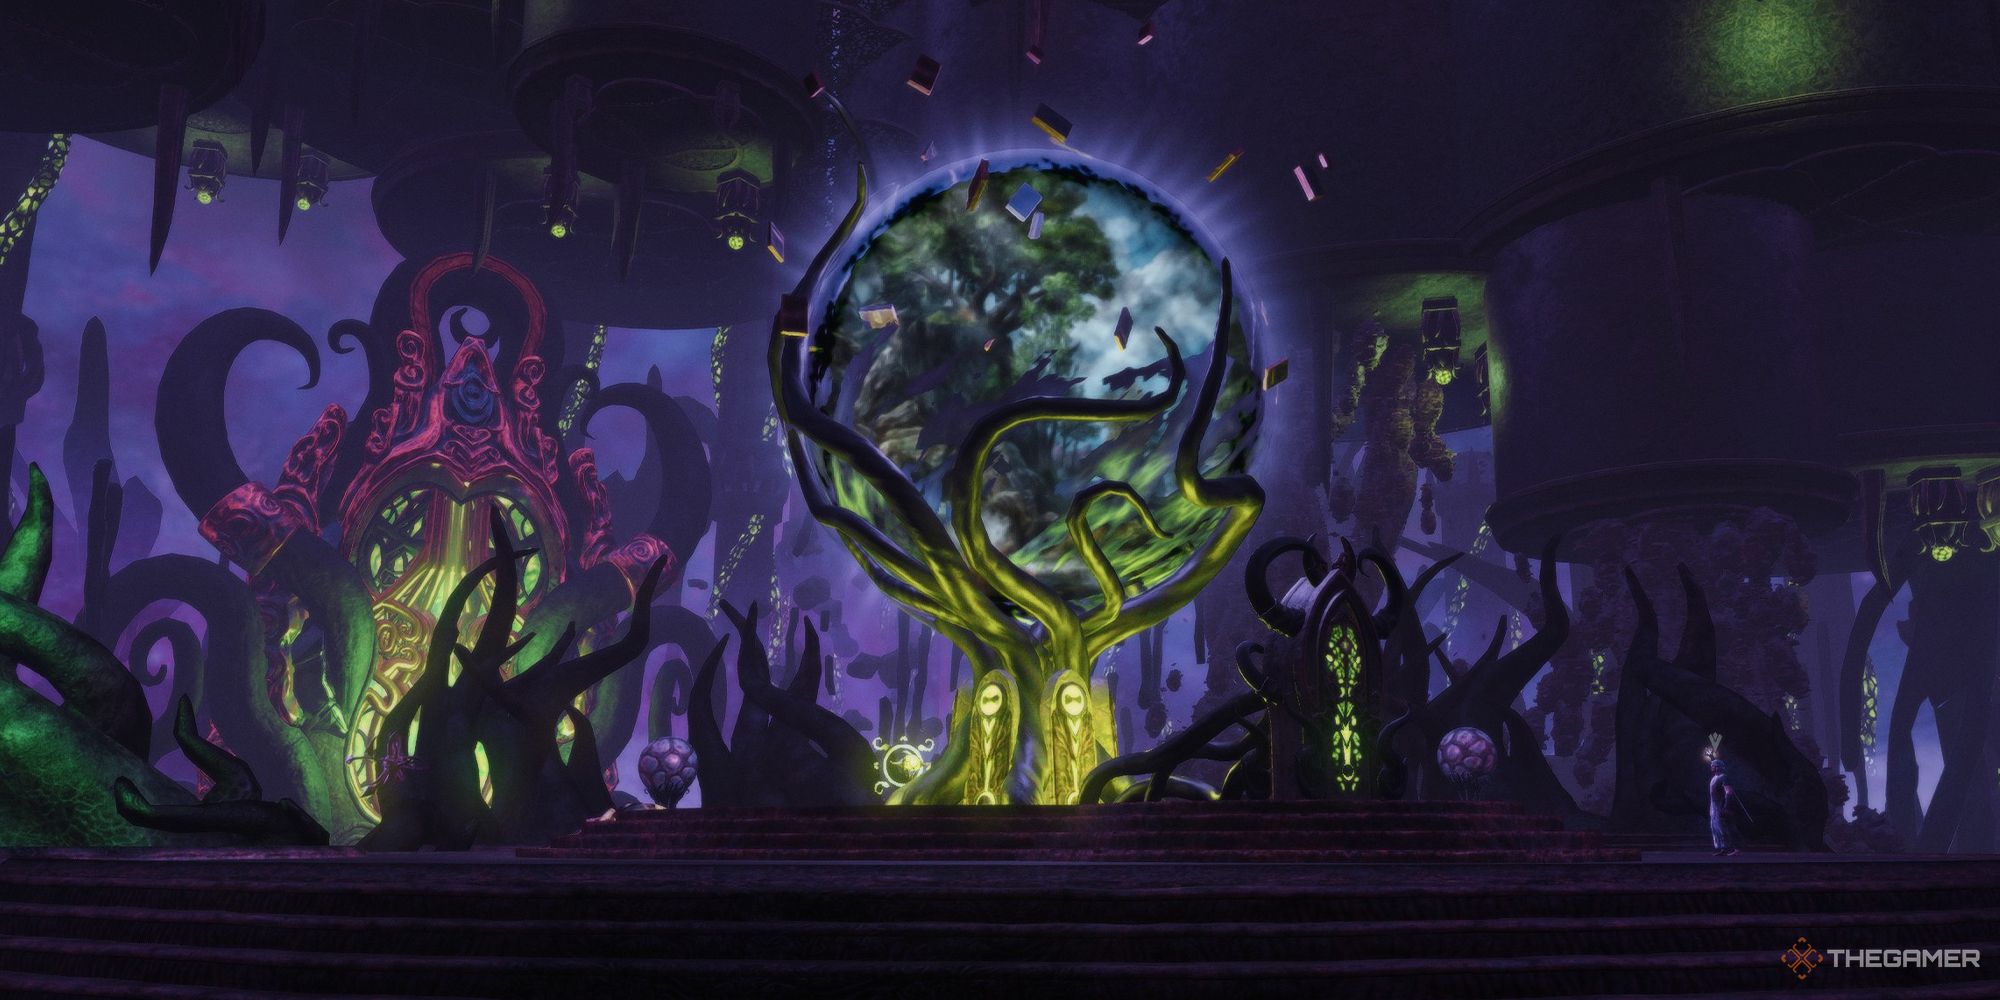 The Elder Scrolls Online Endless Archive room showing a globe in the center with visions of a tree